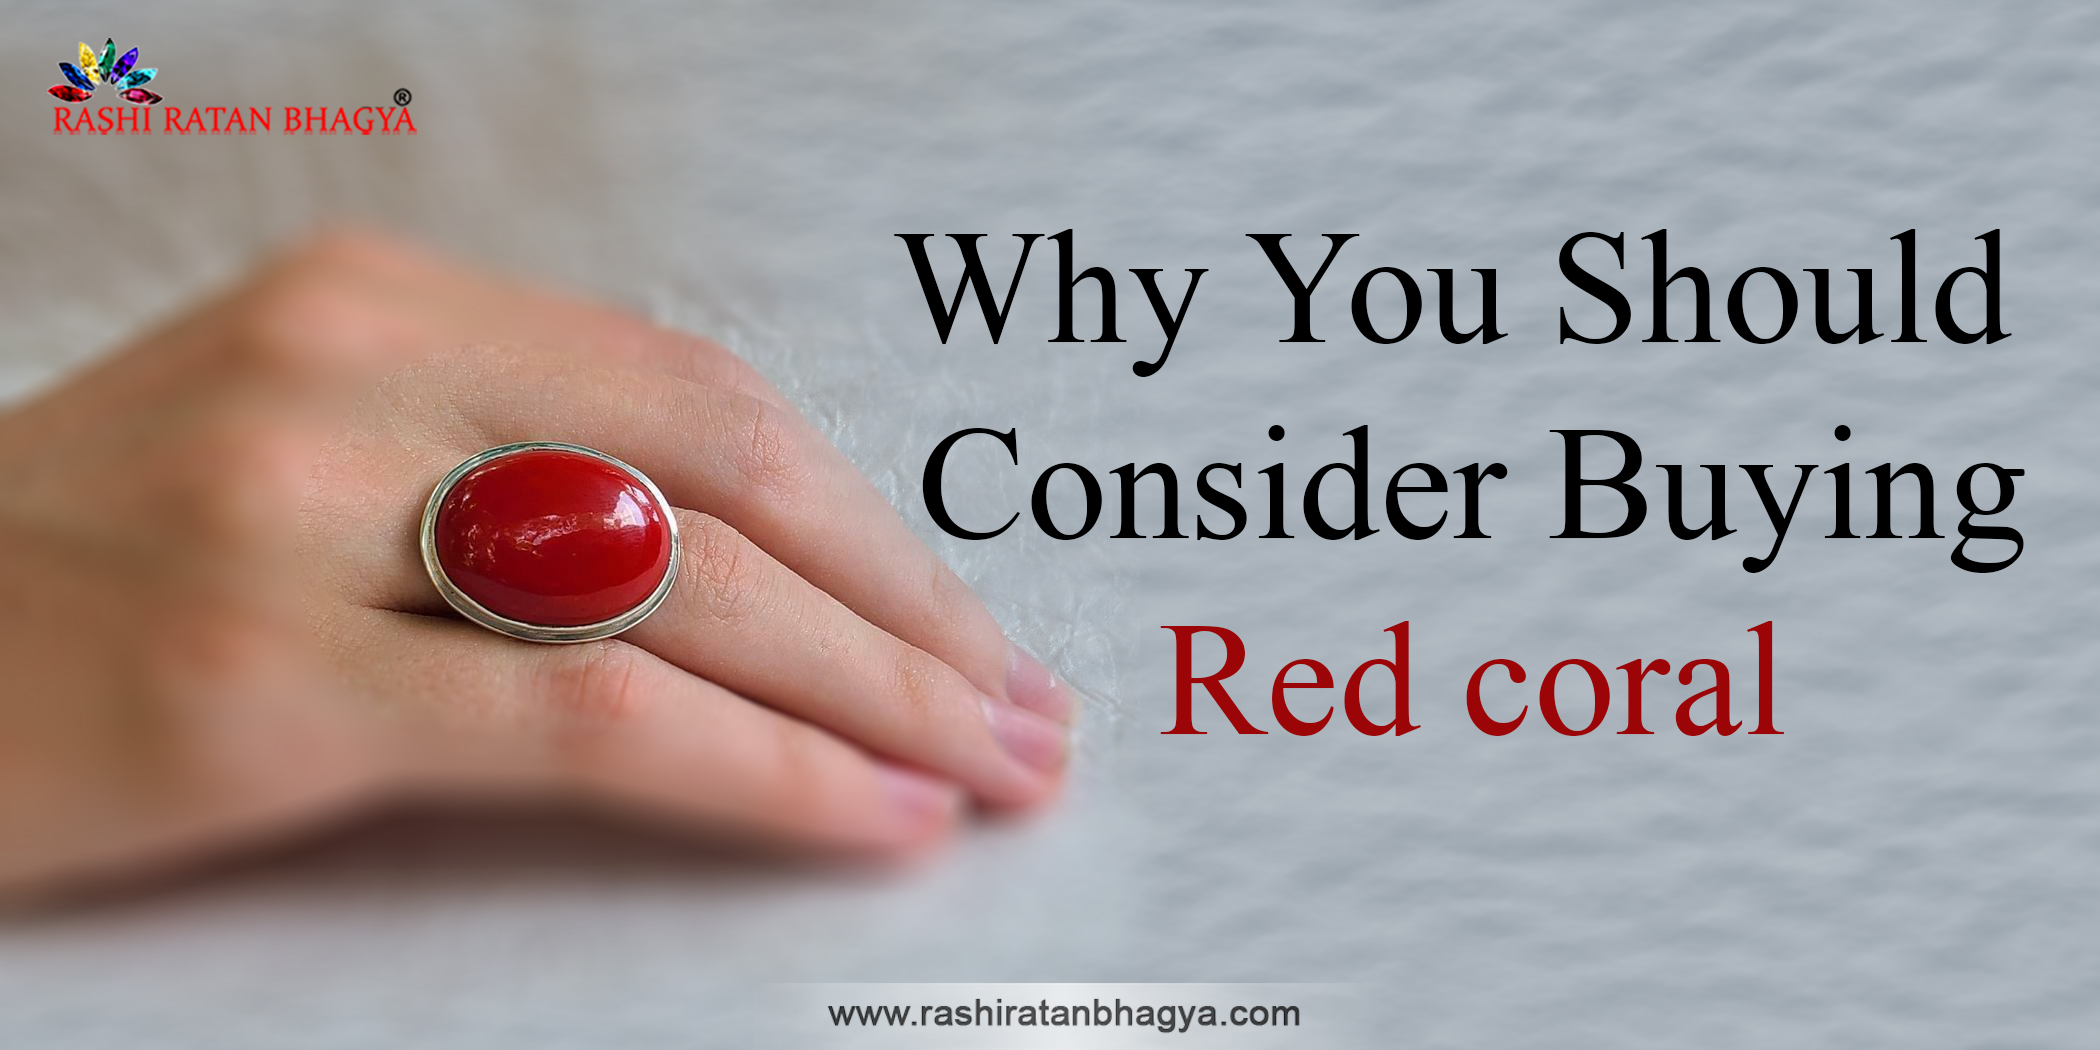 Why You Should Consider Buying Red coral